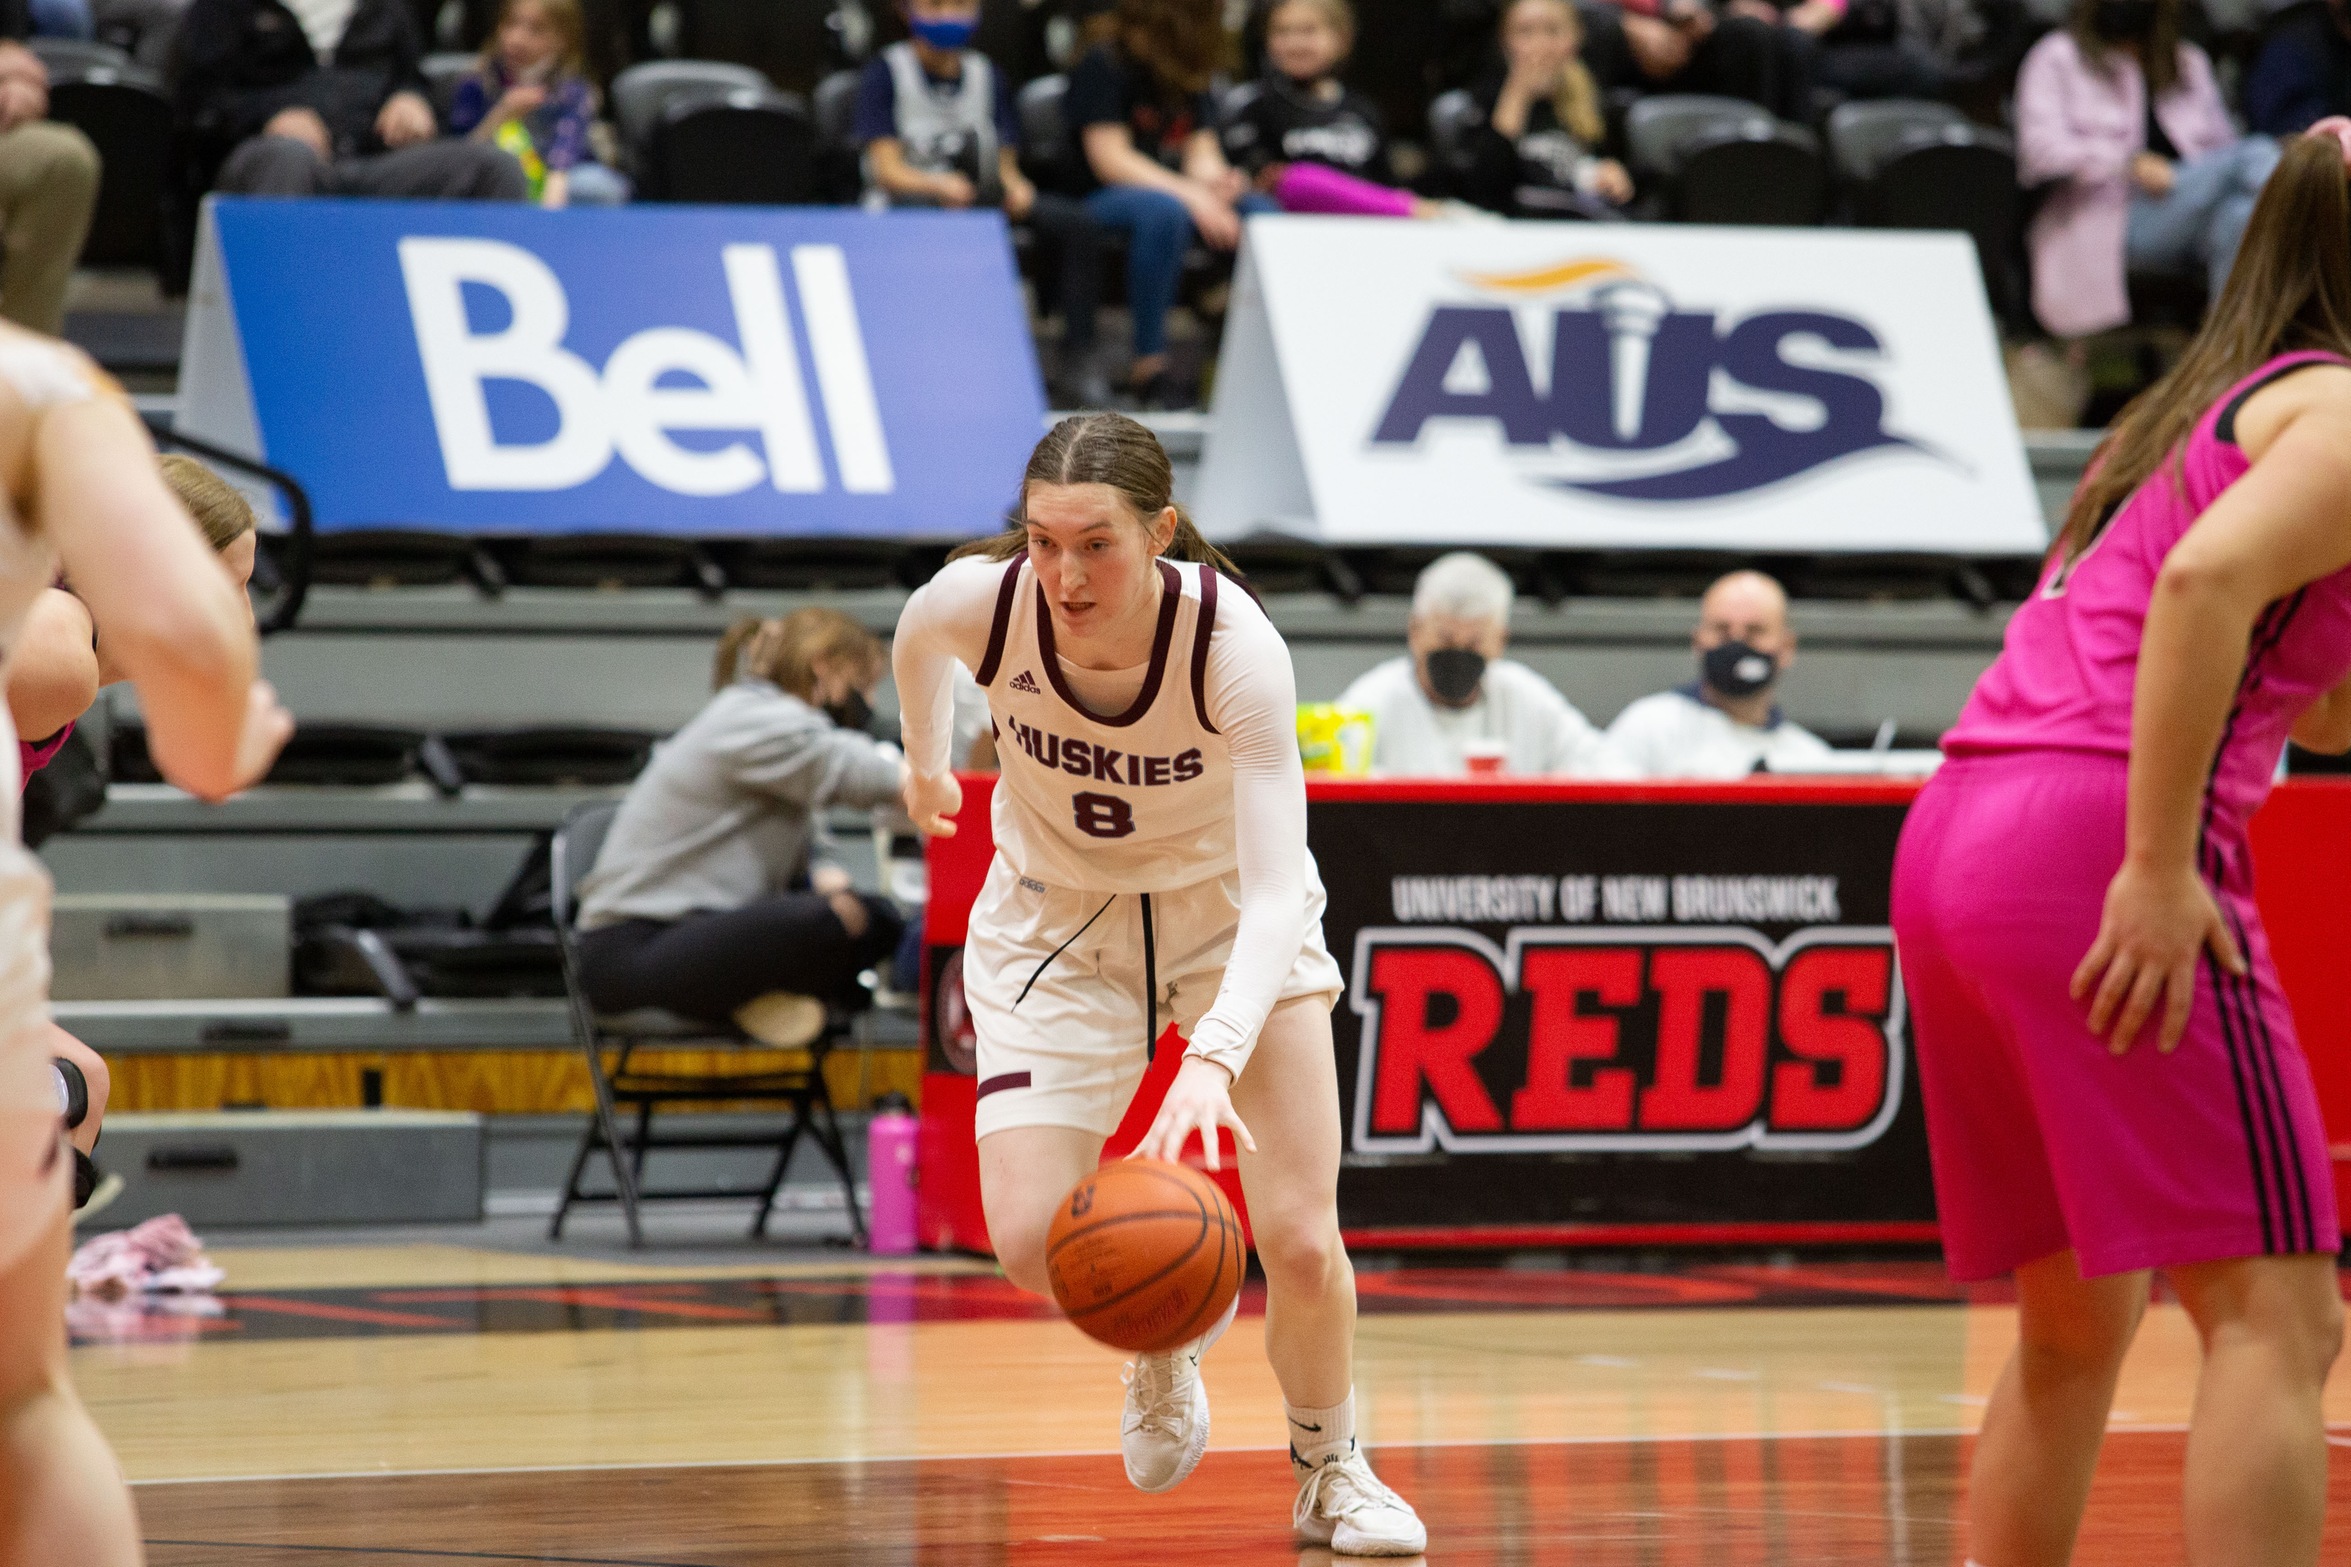 Clara Gascoigne scored a game high 19 points in the Huskies 50-46 win over the UNB REDS on Friday night. (Photos by James West / UNB Athletics)